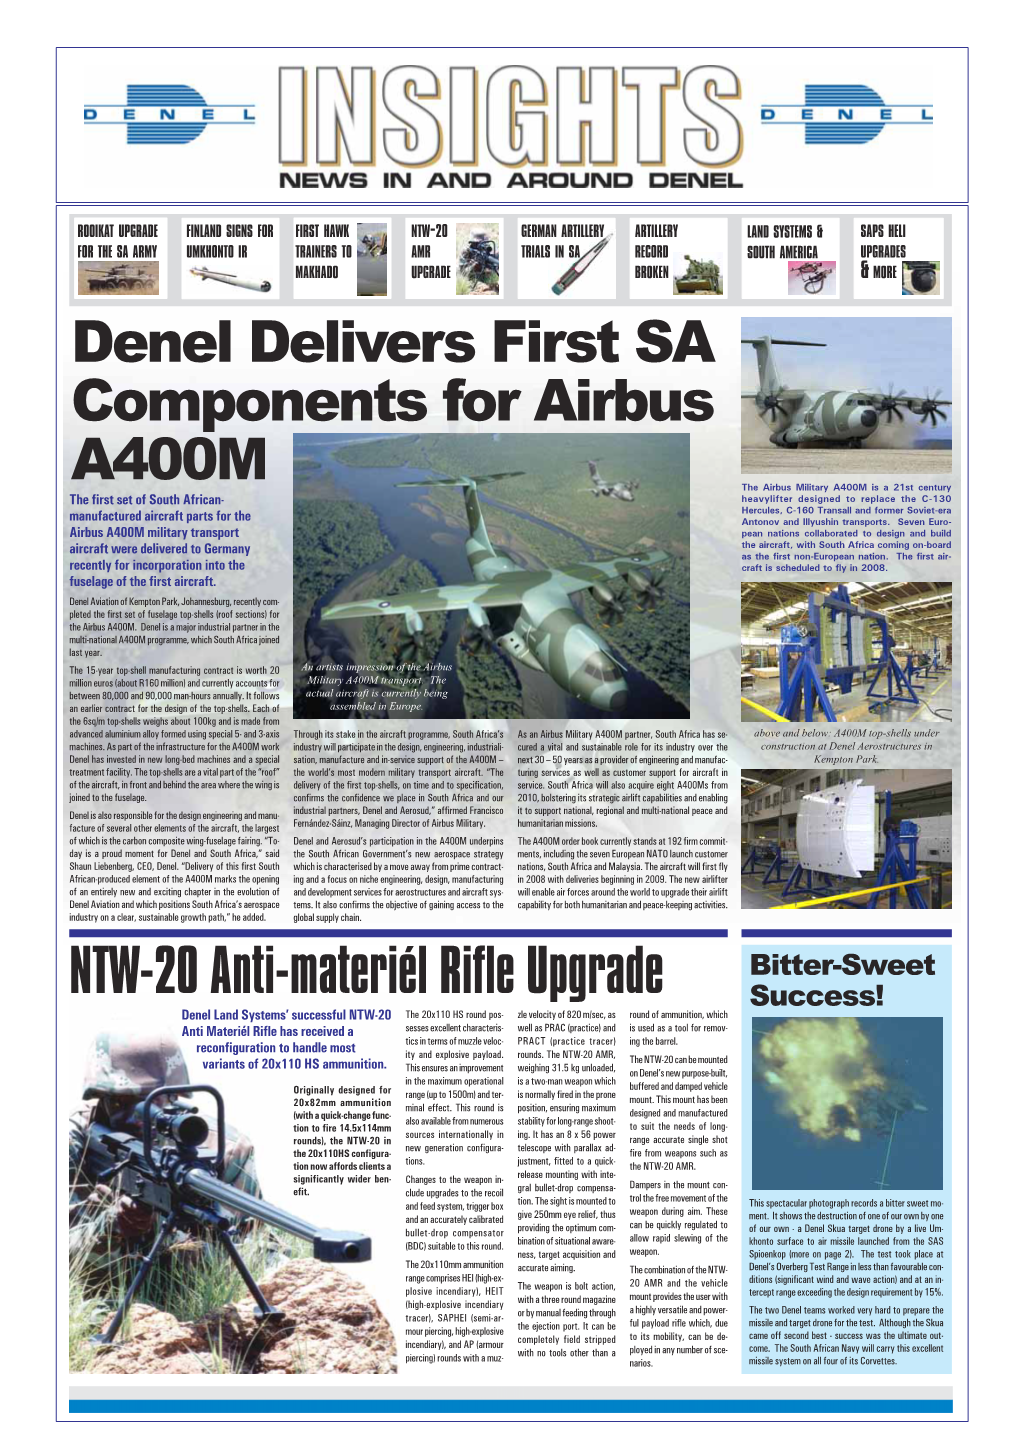 Denel Delivers First SA Components for Airbus A400M NTW-20 Anti